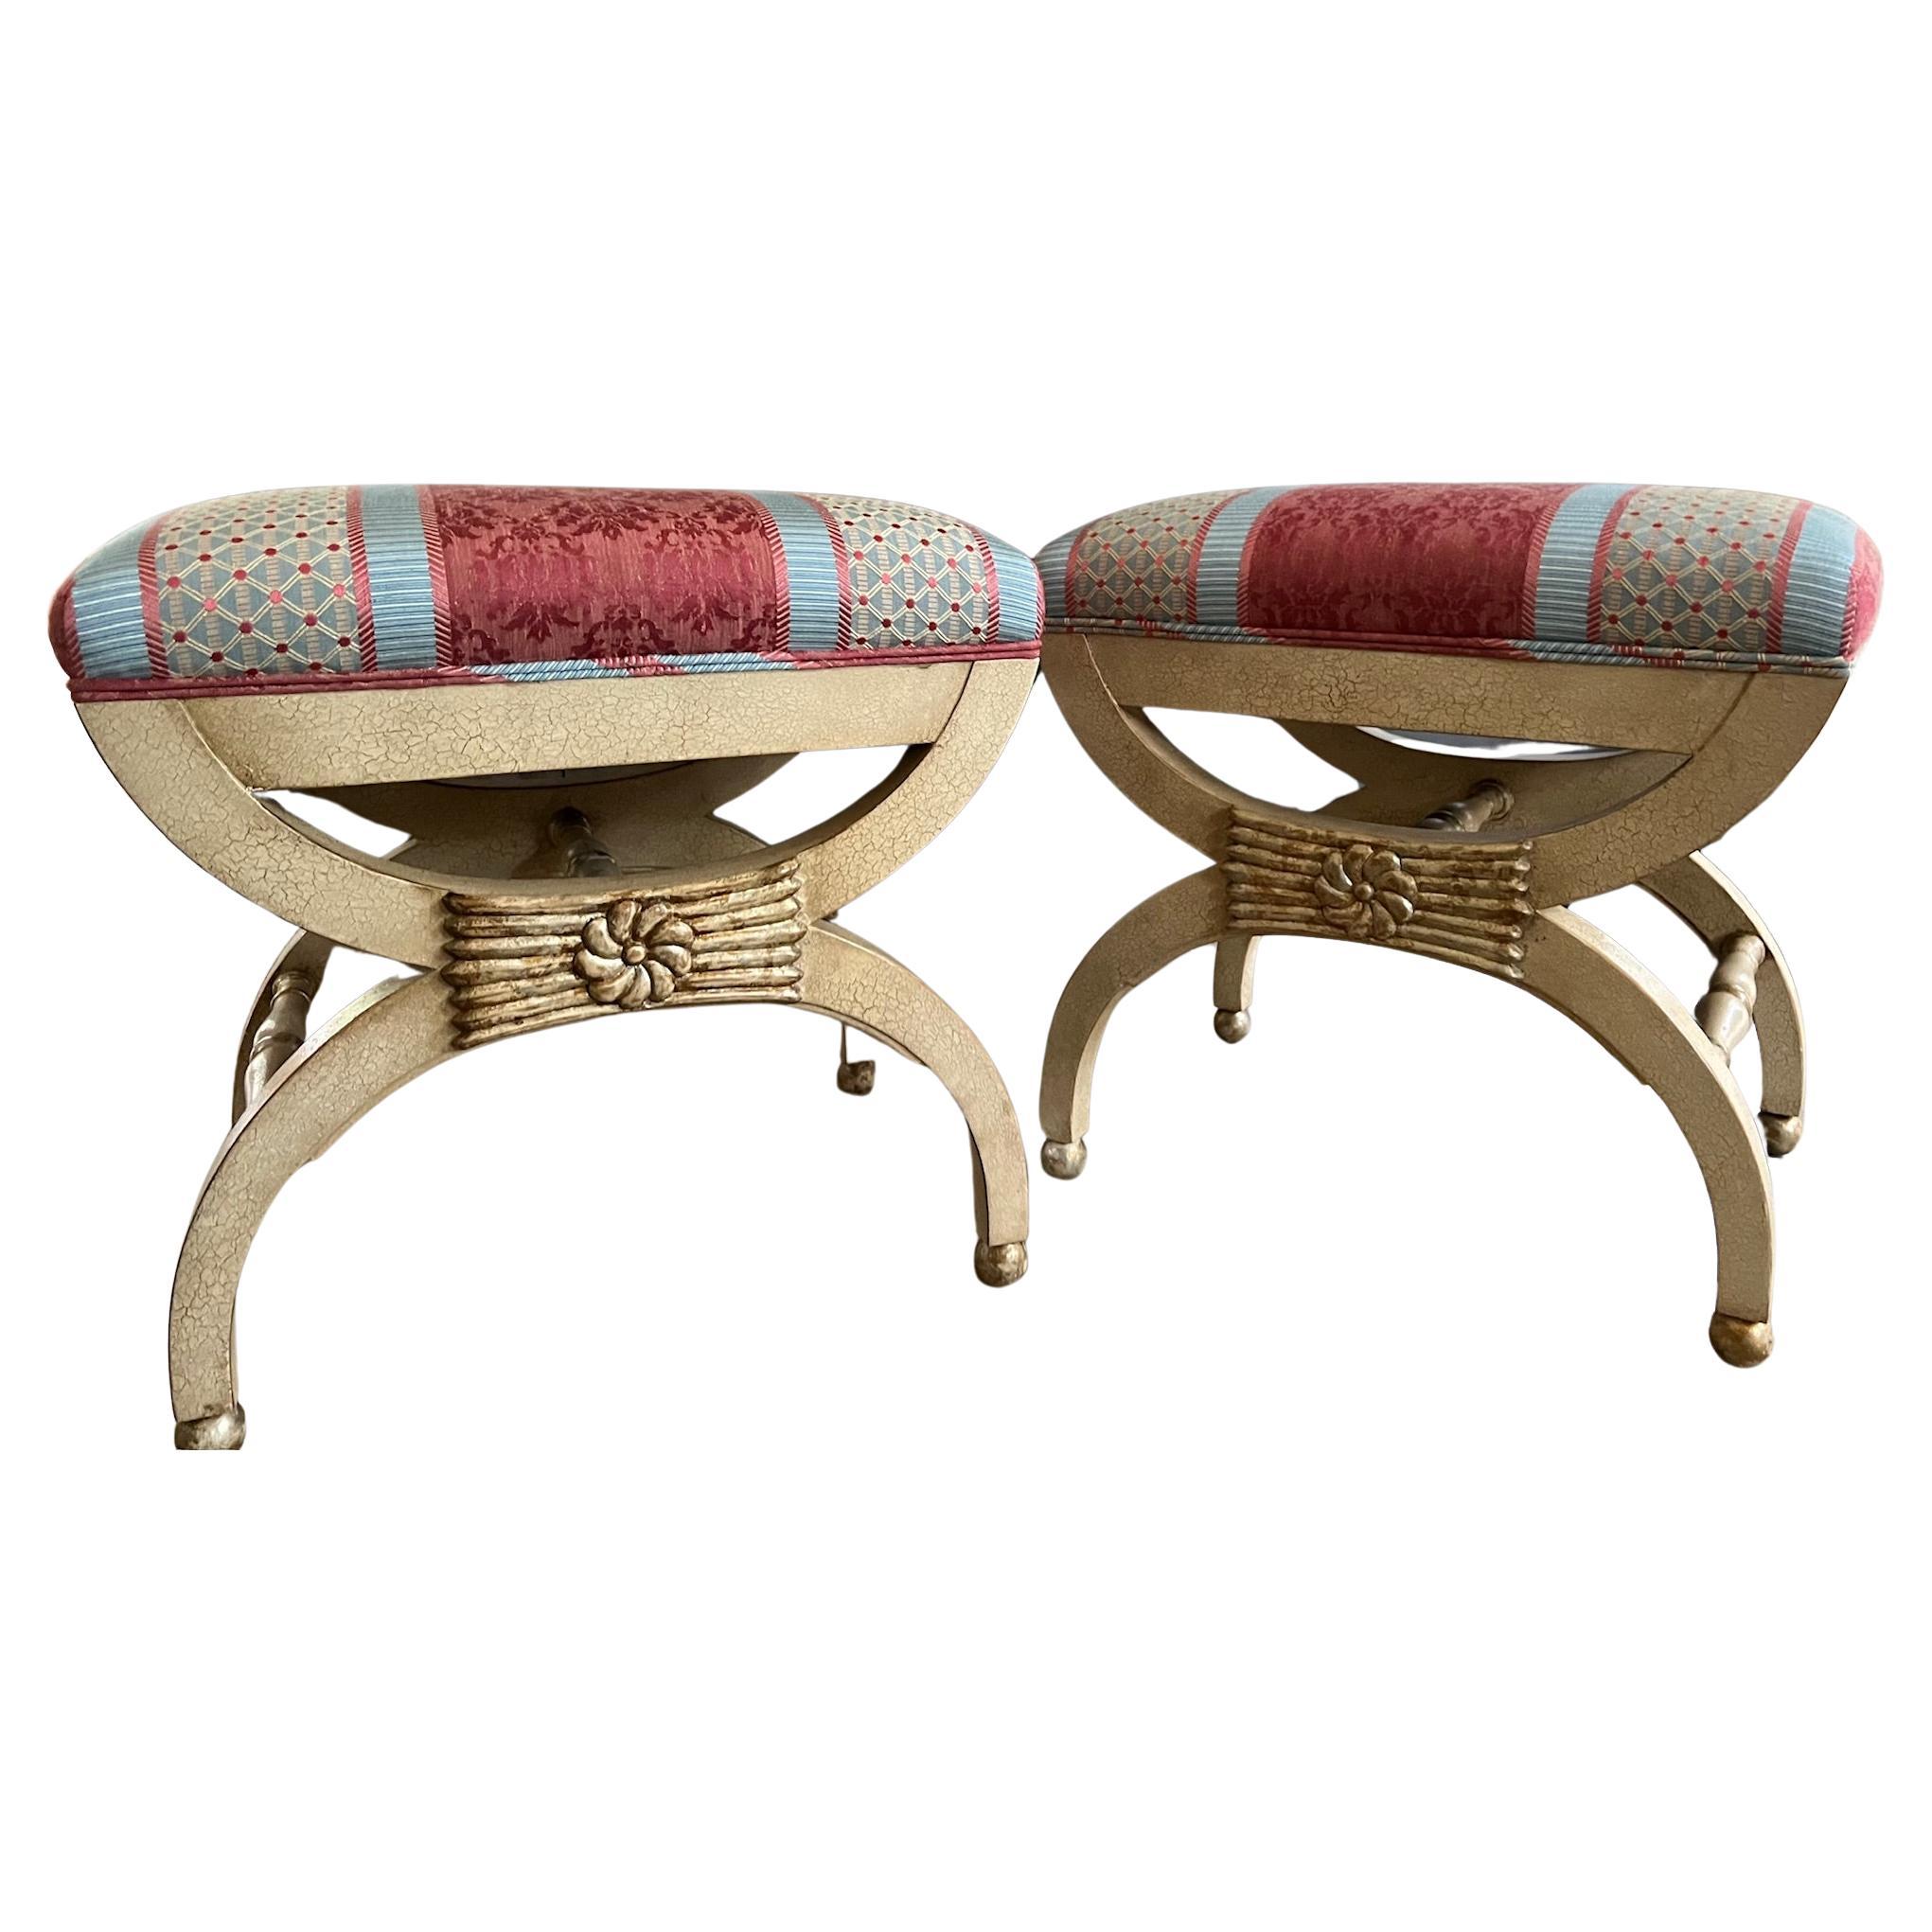 Gilt Painted Neoclassical Style Stools by William Switzer- Set of 2